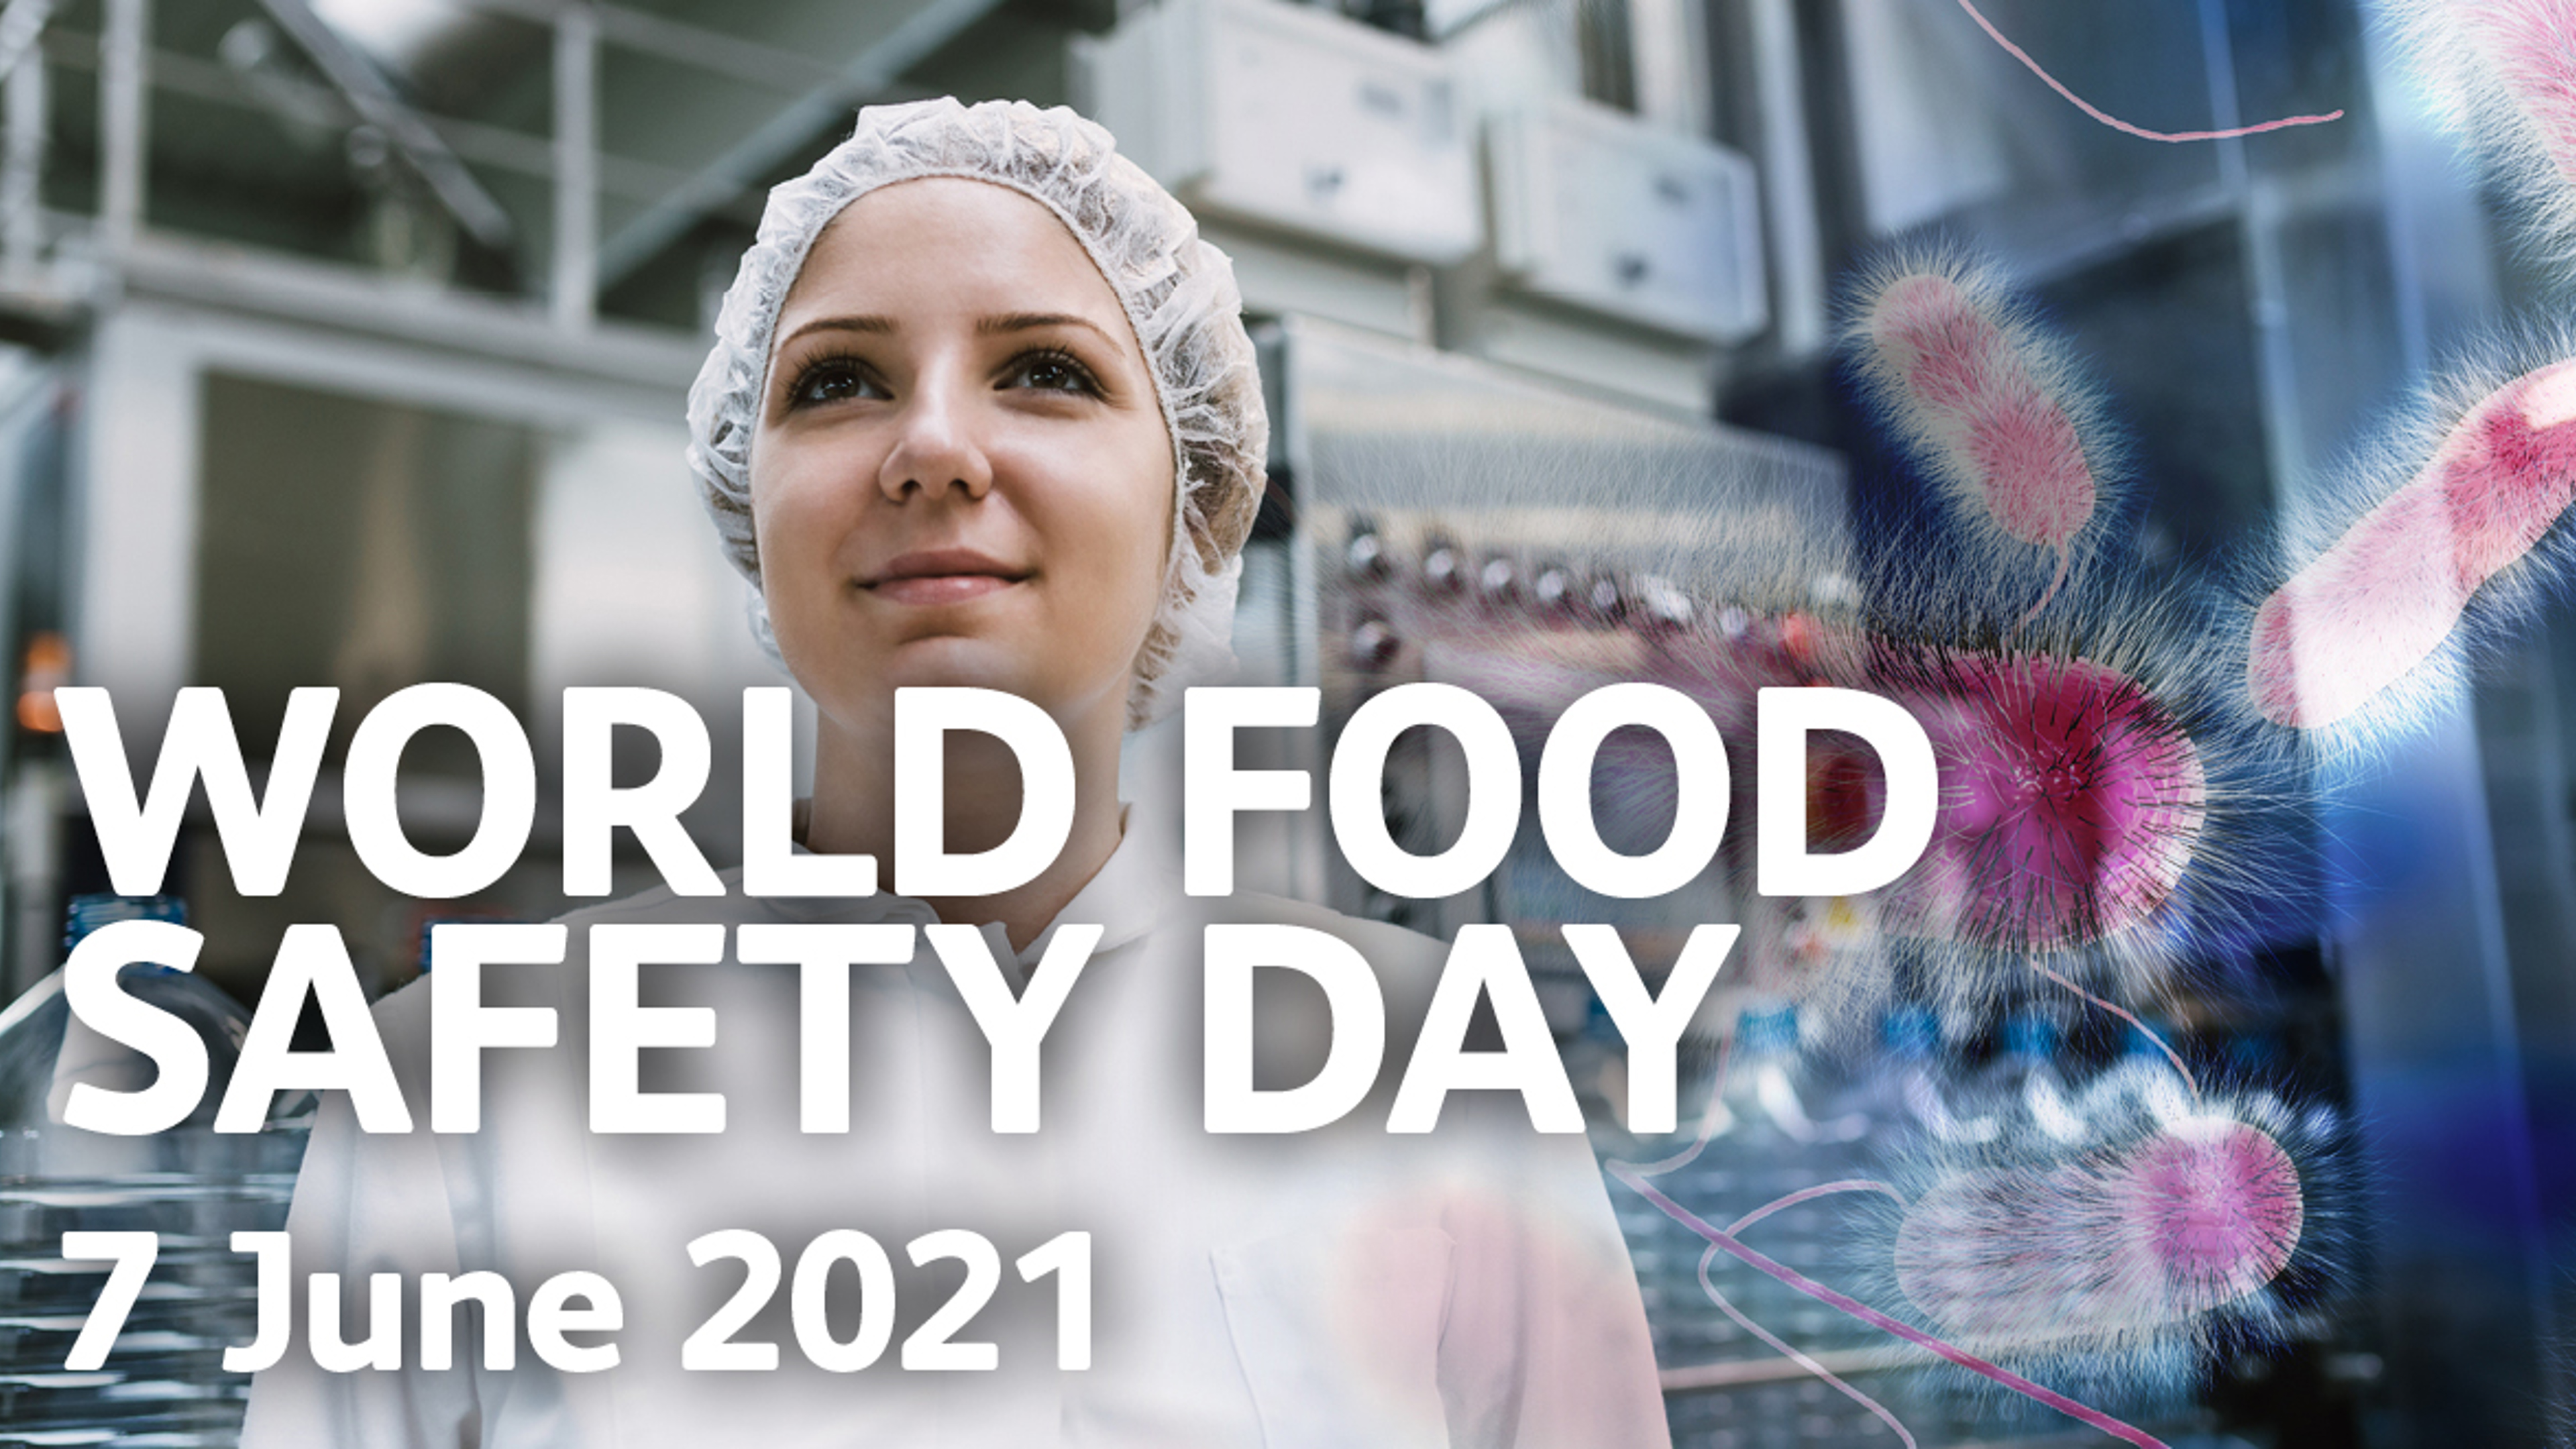 World Food Safety Day: today and every day for business operators